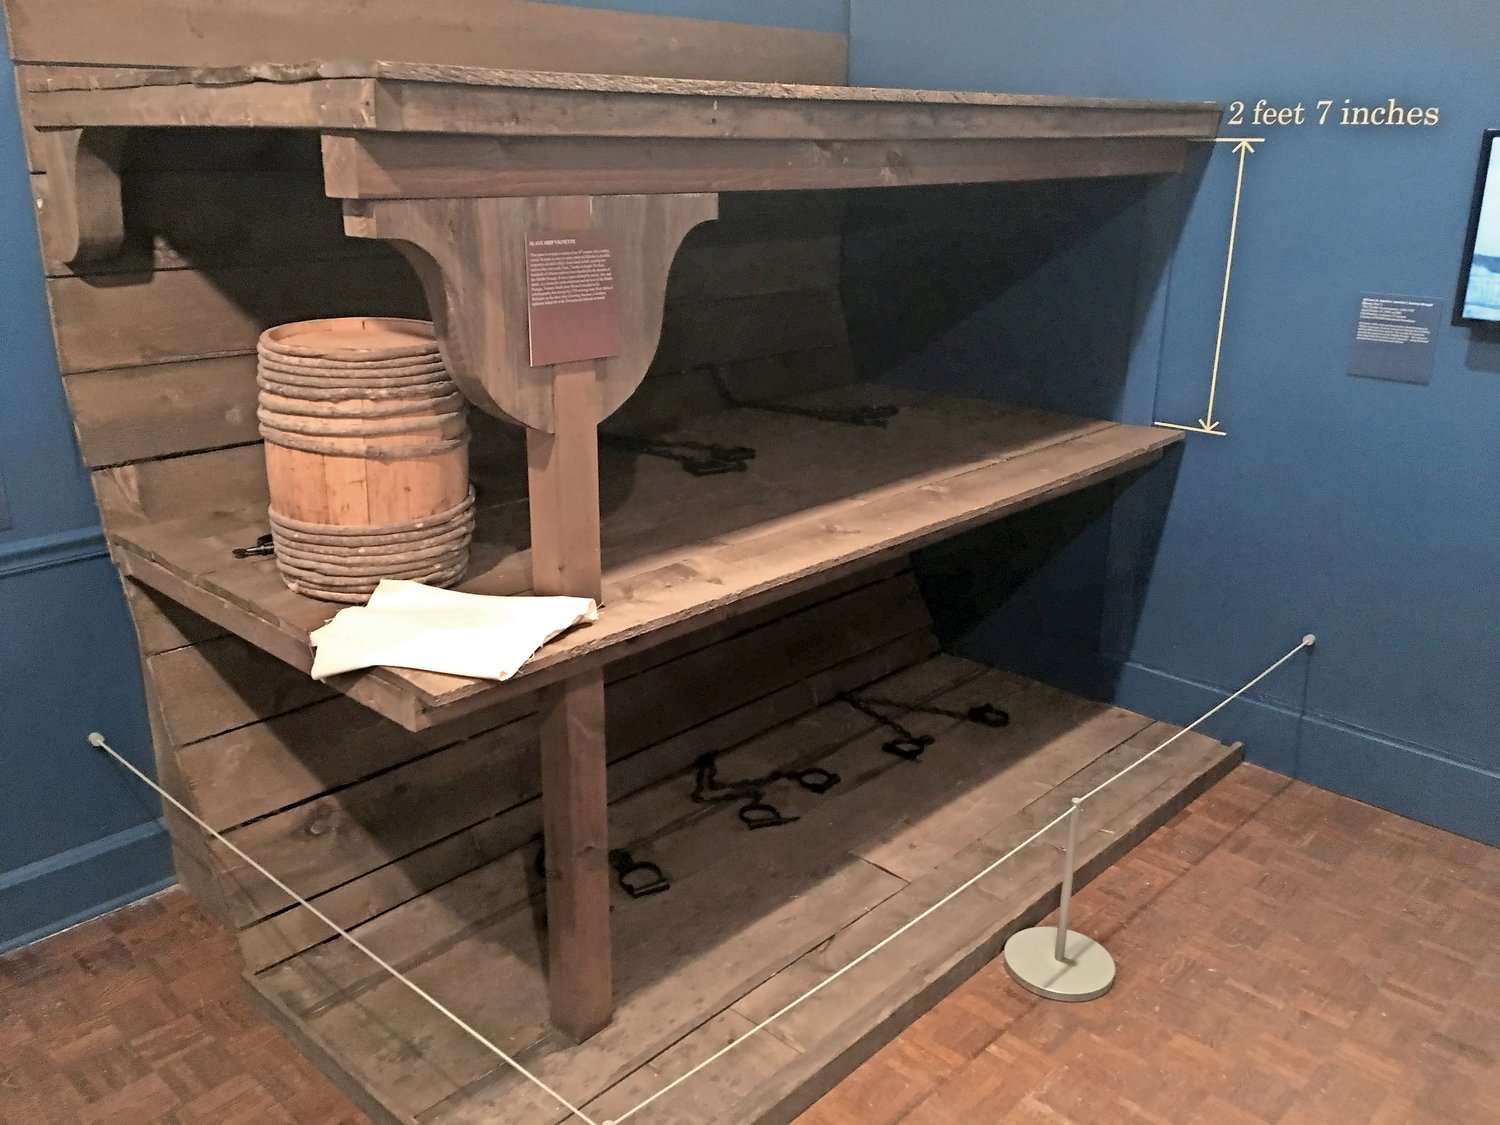 Slaves’ sleeping quarters on display at the Stony Brook Museum. Bunks were spaced 2 feet, 7 inches apart.